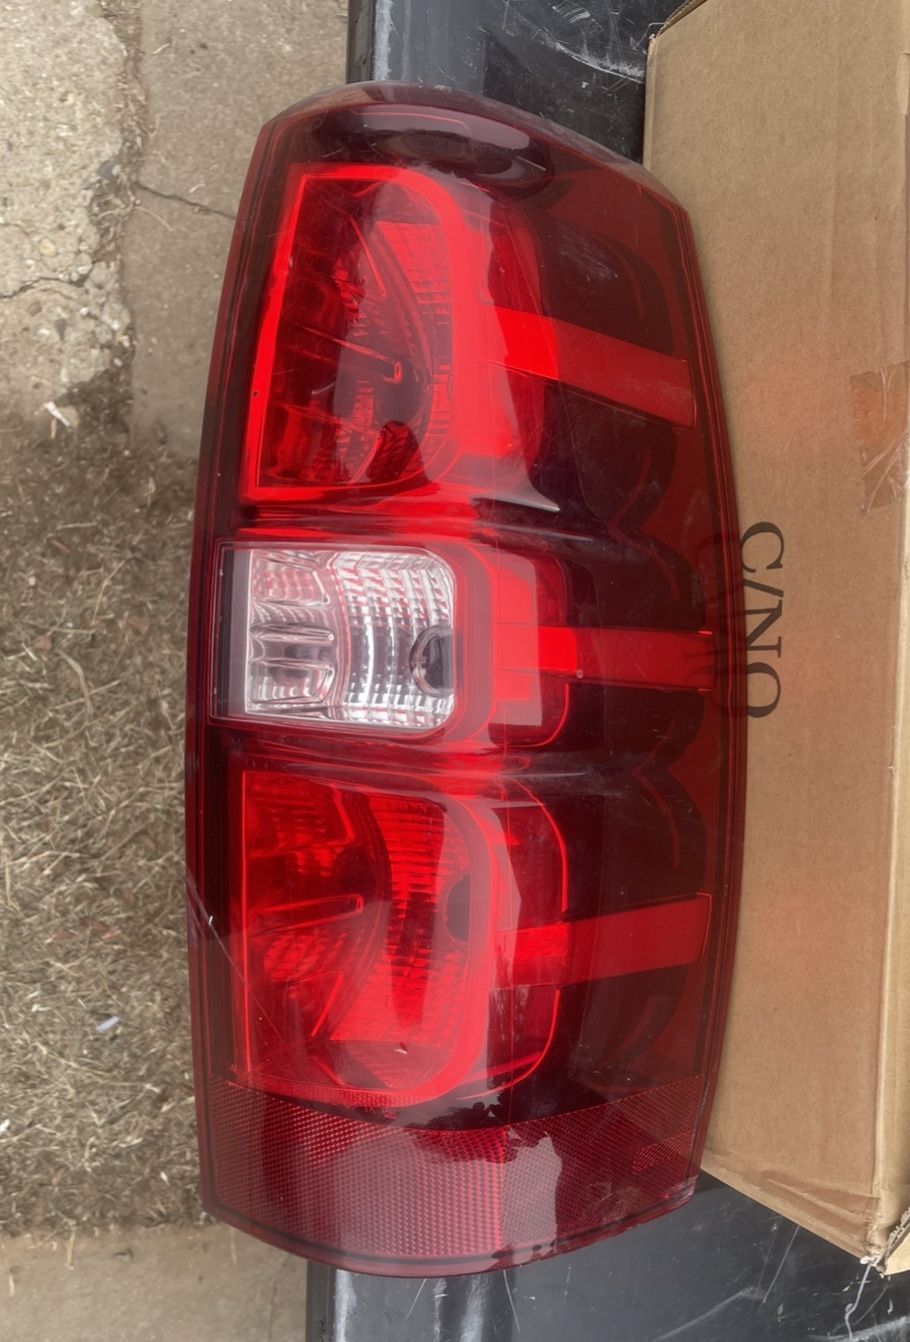 $30.00 - USED PASSENGER TAILLIGHT FROM 2007 CHEVY CHEVROLET AVALANCHE LUBBOCK,TX